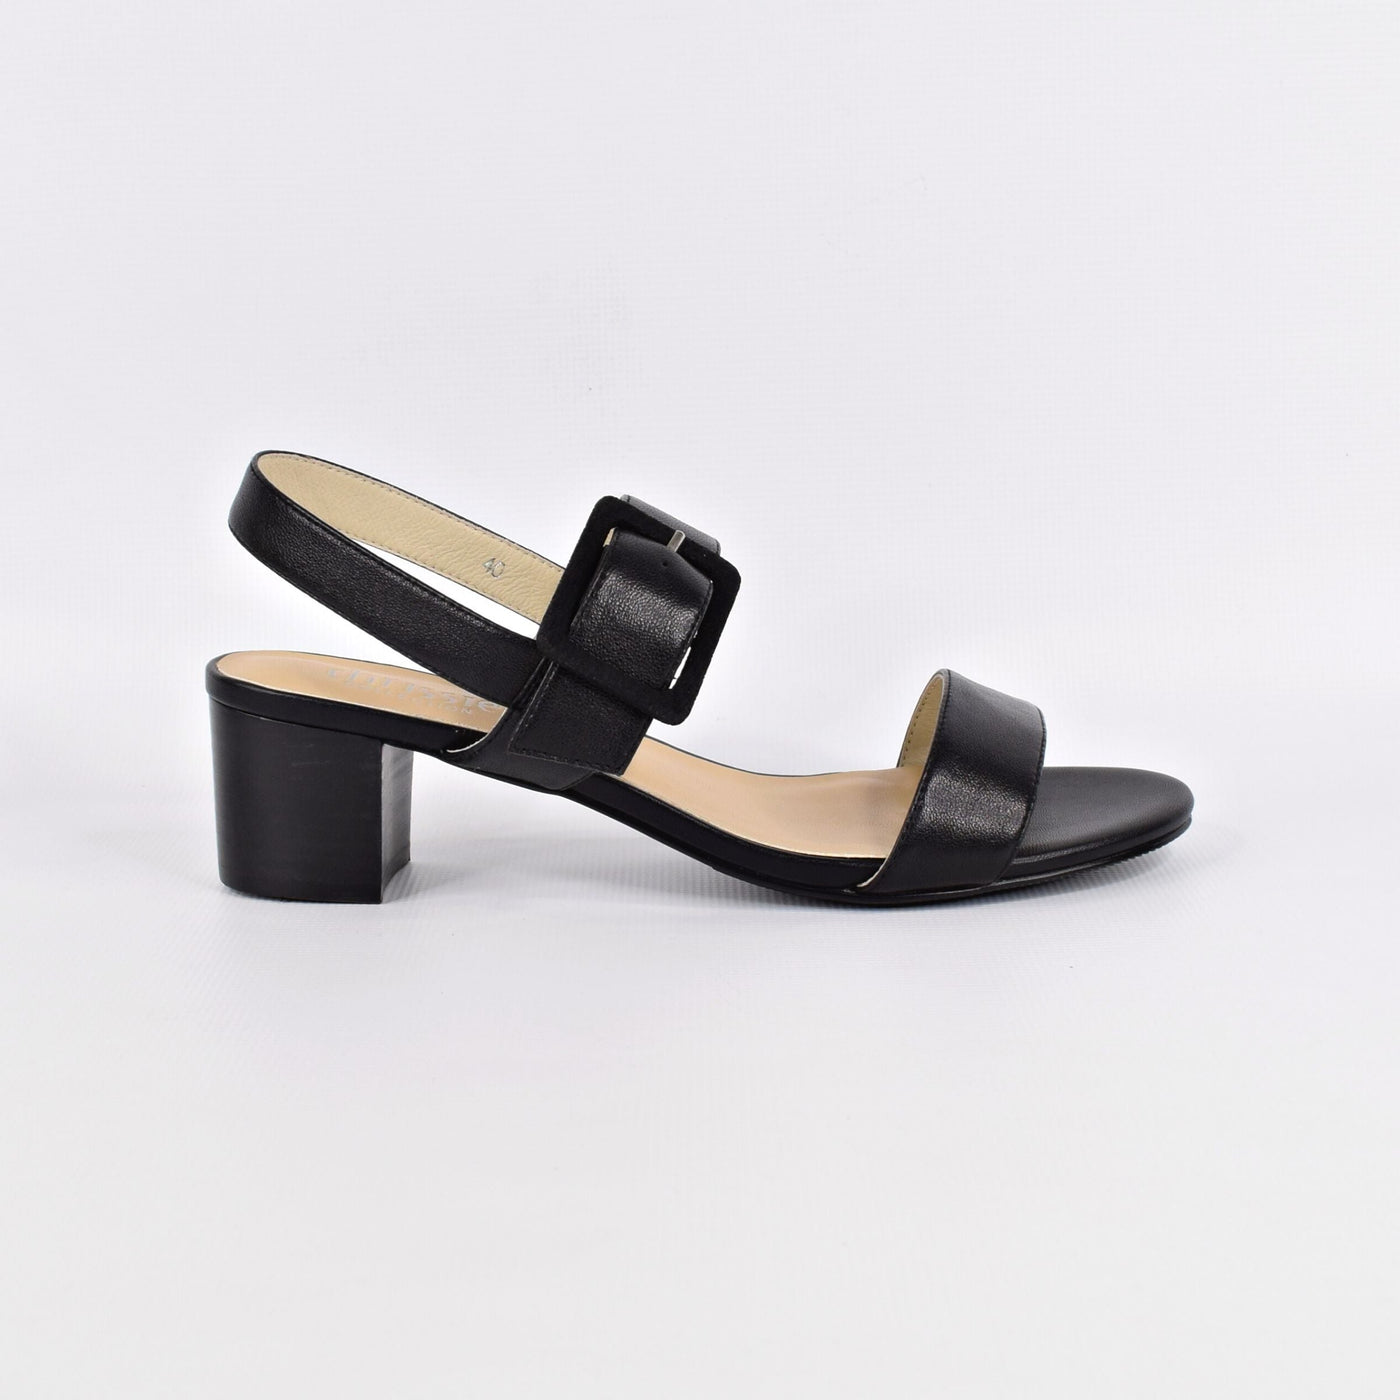 Brandi Black by Chrissie | Womens Heels by white back drop leather lined